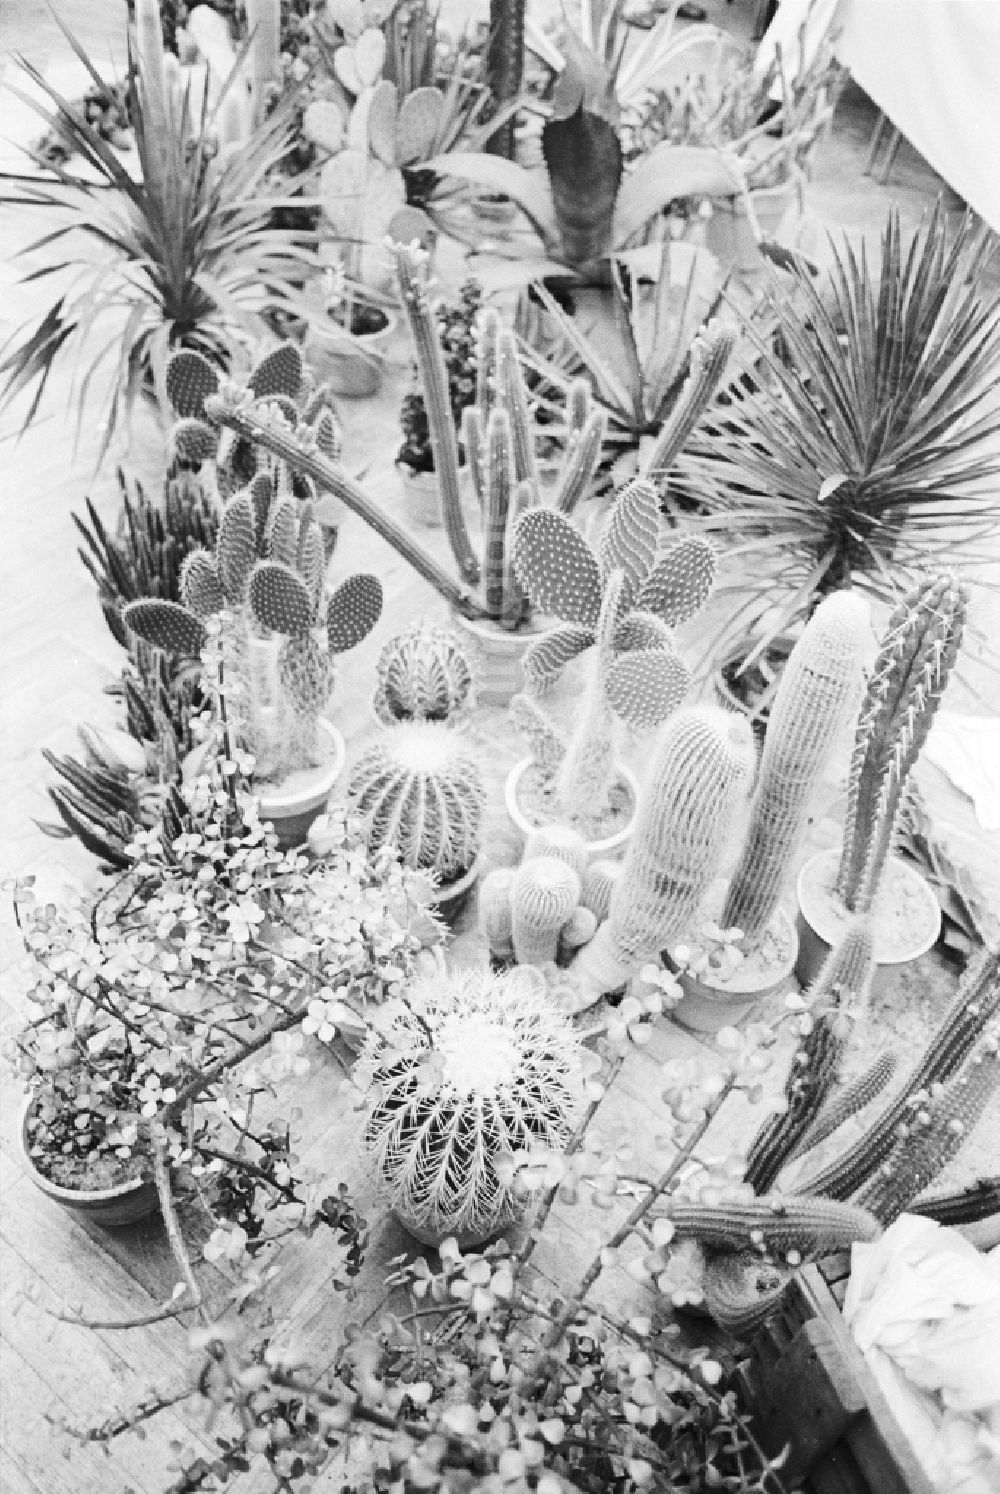 GDR picture archive: Berlin - Cacti exhibition in the Cultural center Karlshorst in Berlin-Lichtenberg, the former capital of the GDR, German Democratic Republic